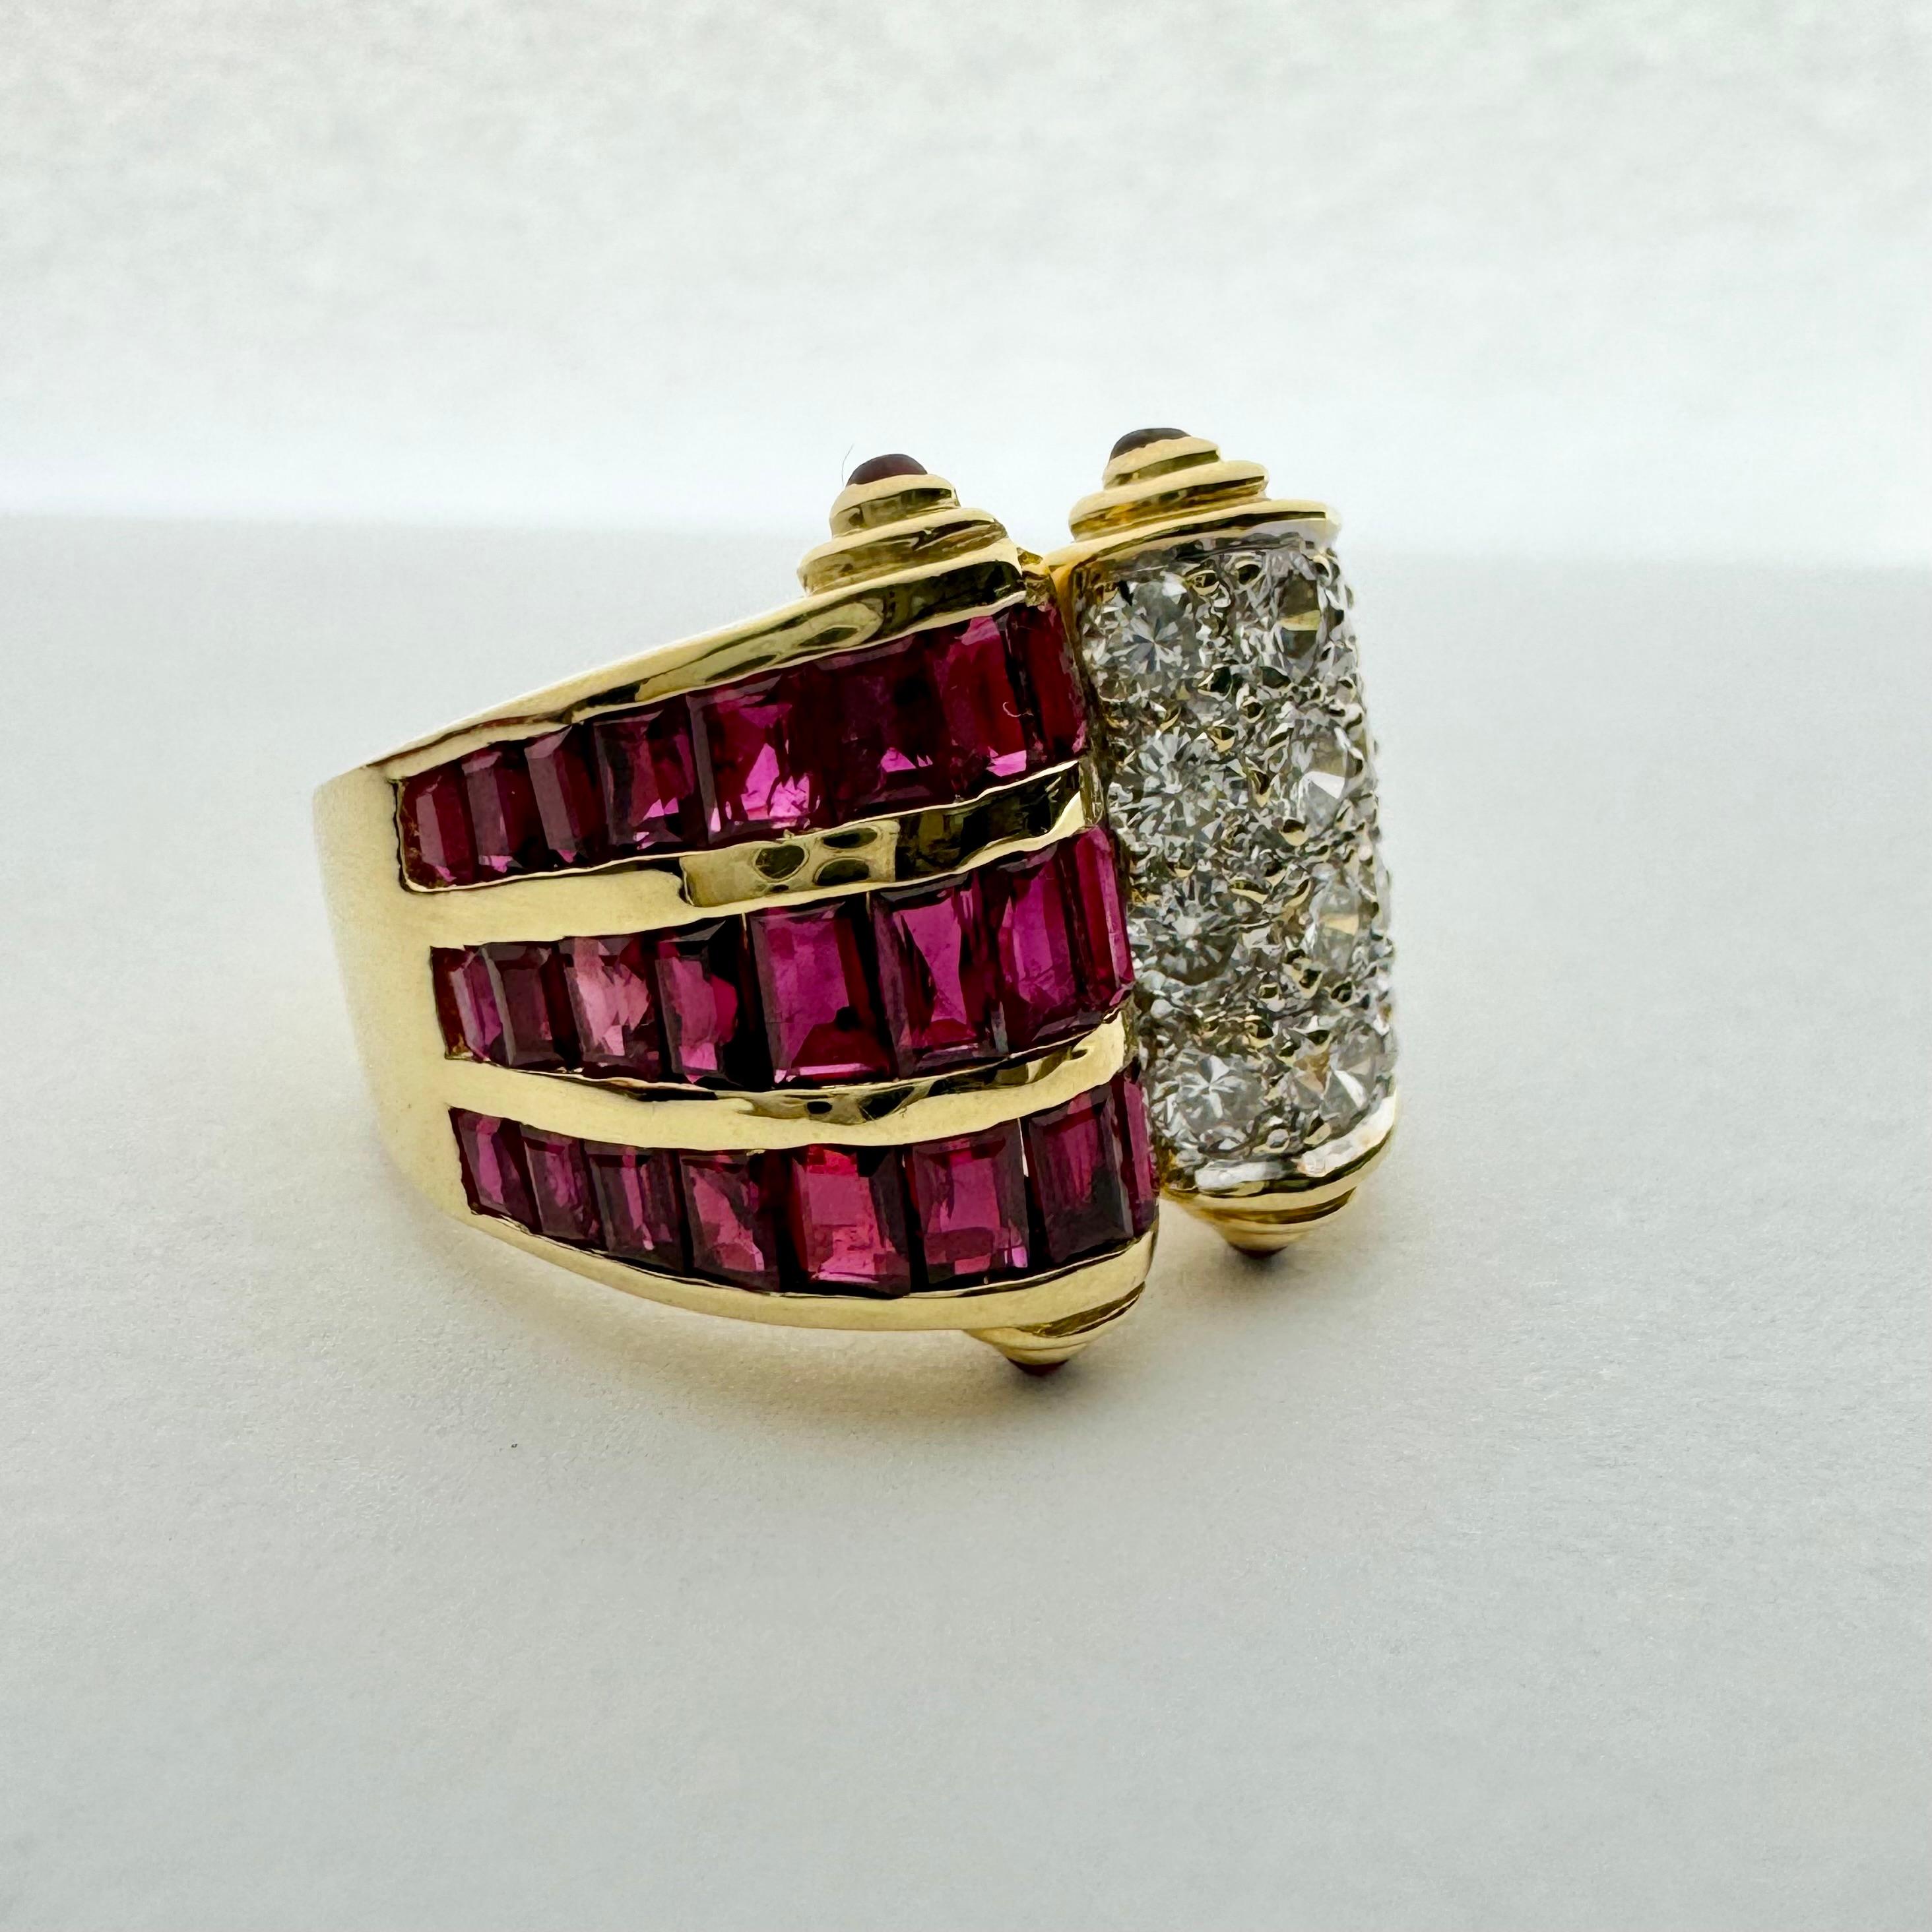 A very rare, red ruby and natural brilliant cut white diamond twin scroll ring, in 18K yellow gold. Uniquely beautiful, this ring features stunning mirrored scroll designs; one side showcasing dazzling pave set round brilliant white diamonds, and